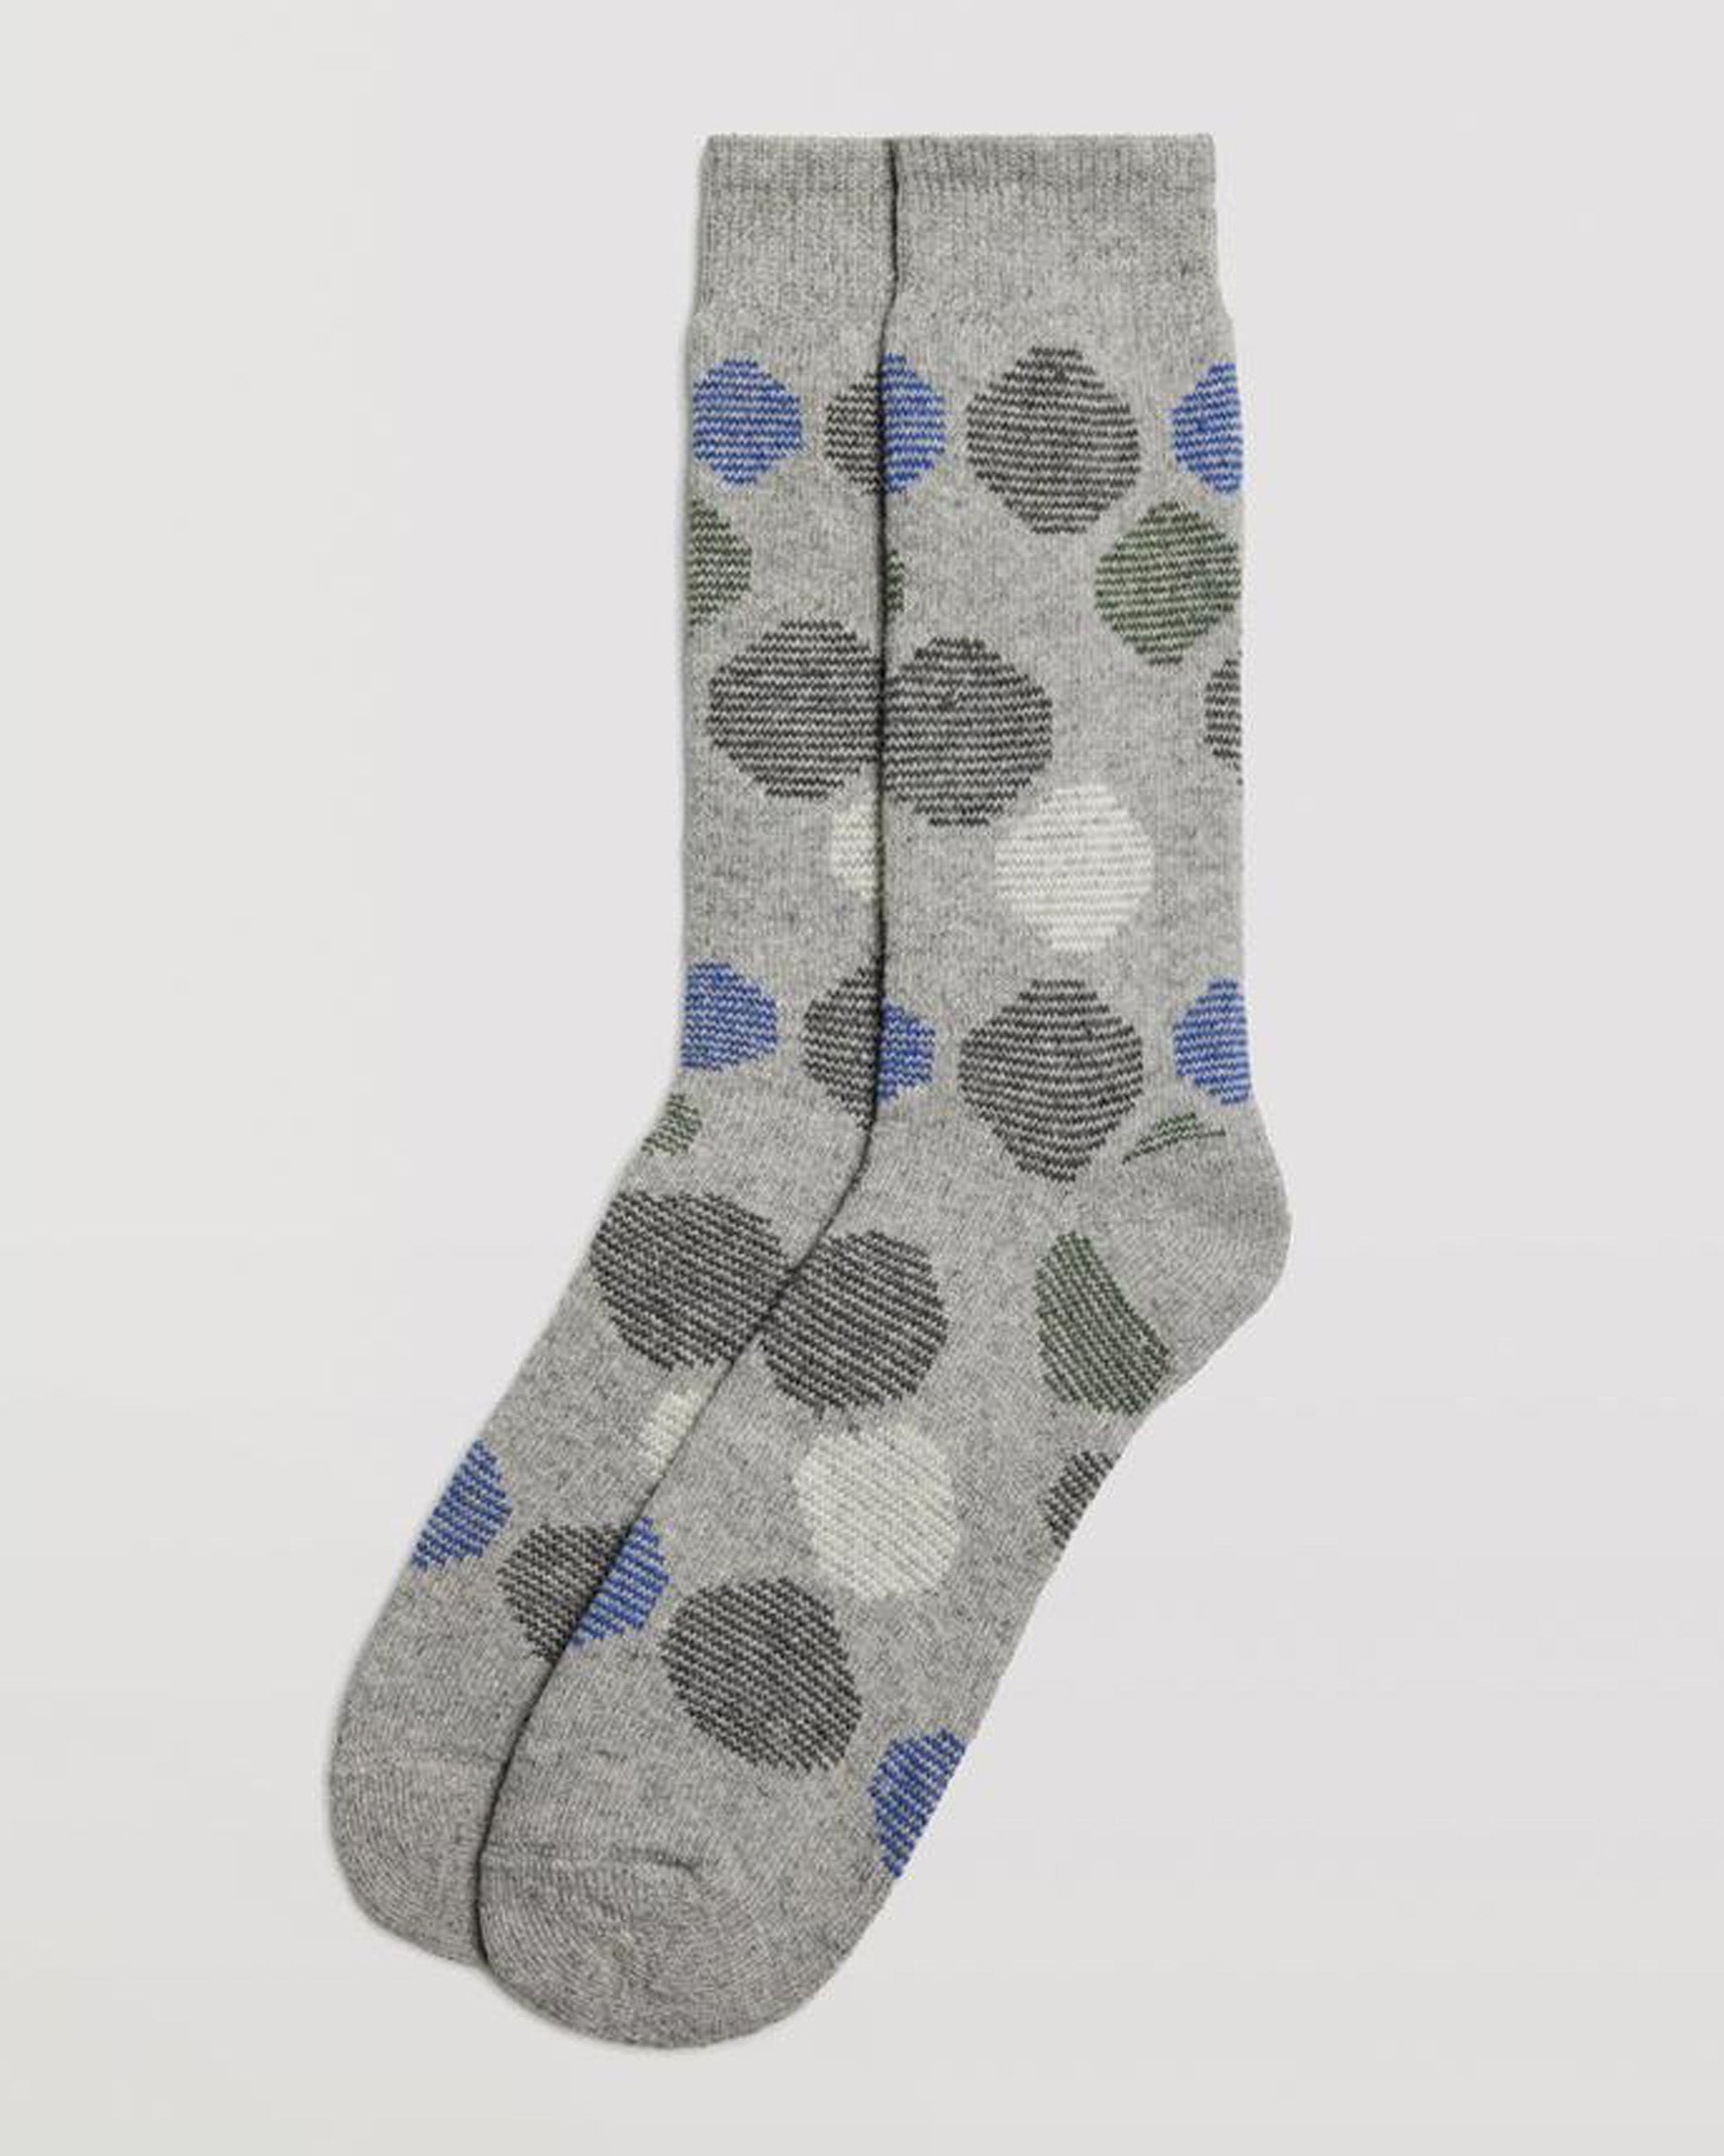 Ysabel Mora 22890 Circles Thermal Socks - Light grey chunky wooly angora knitted warm and cosy men's thermal socks with a linear spot pattern in blue, green, black and cream.